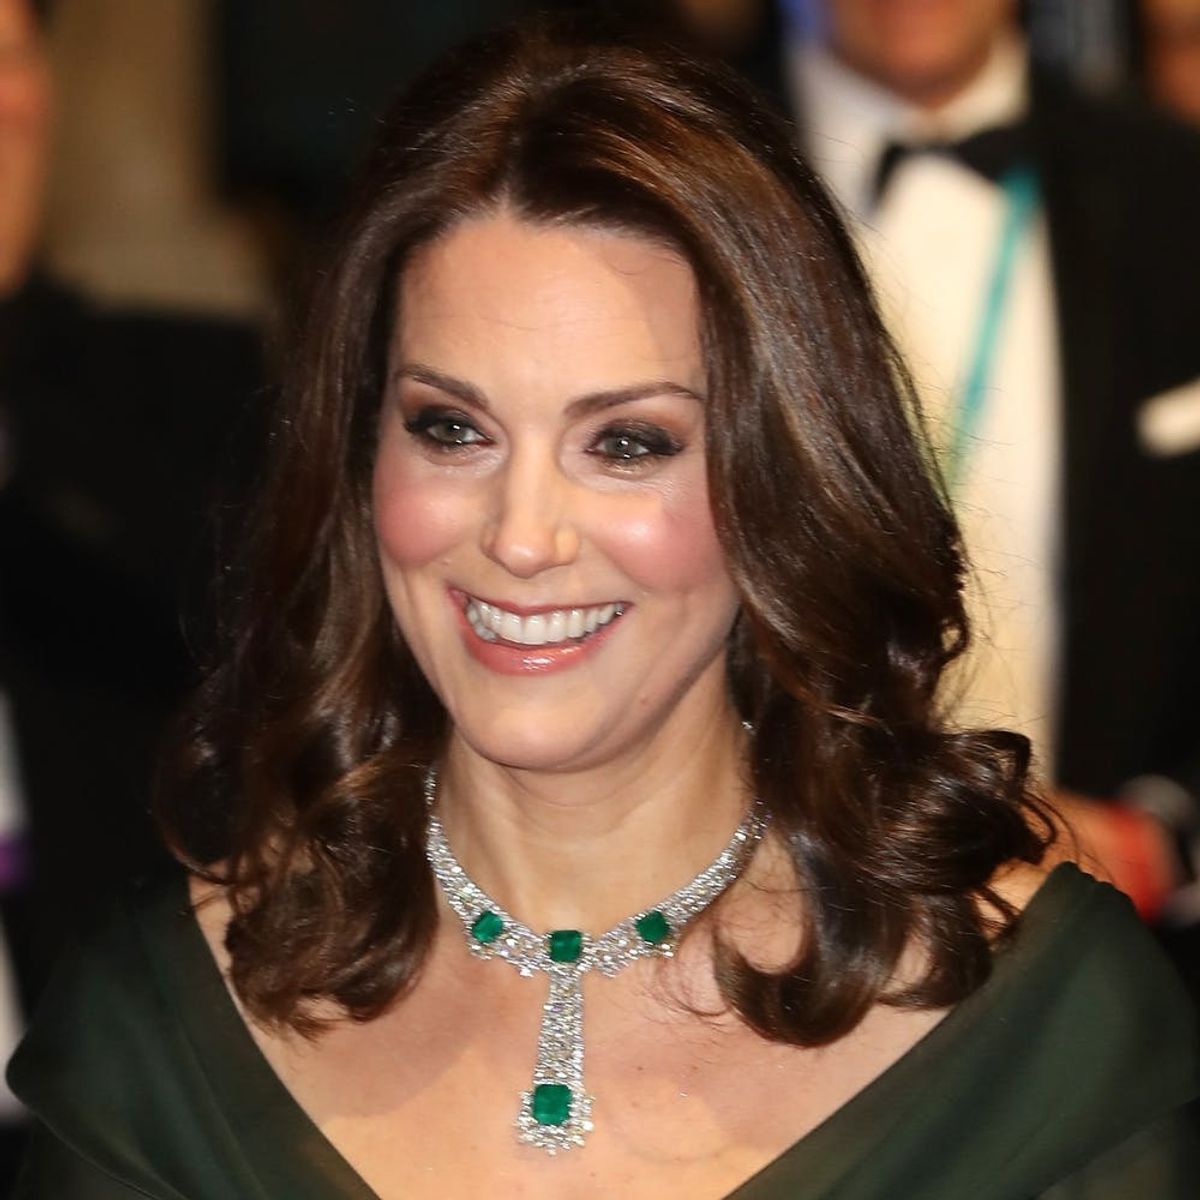 Why Kate Middleton’s BAFTA Awards Gown Has People Up in Arms